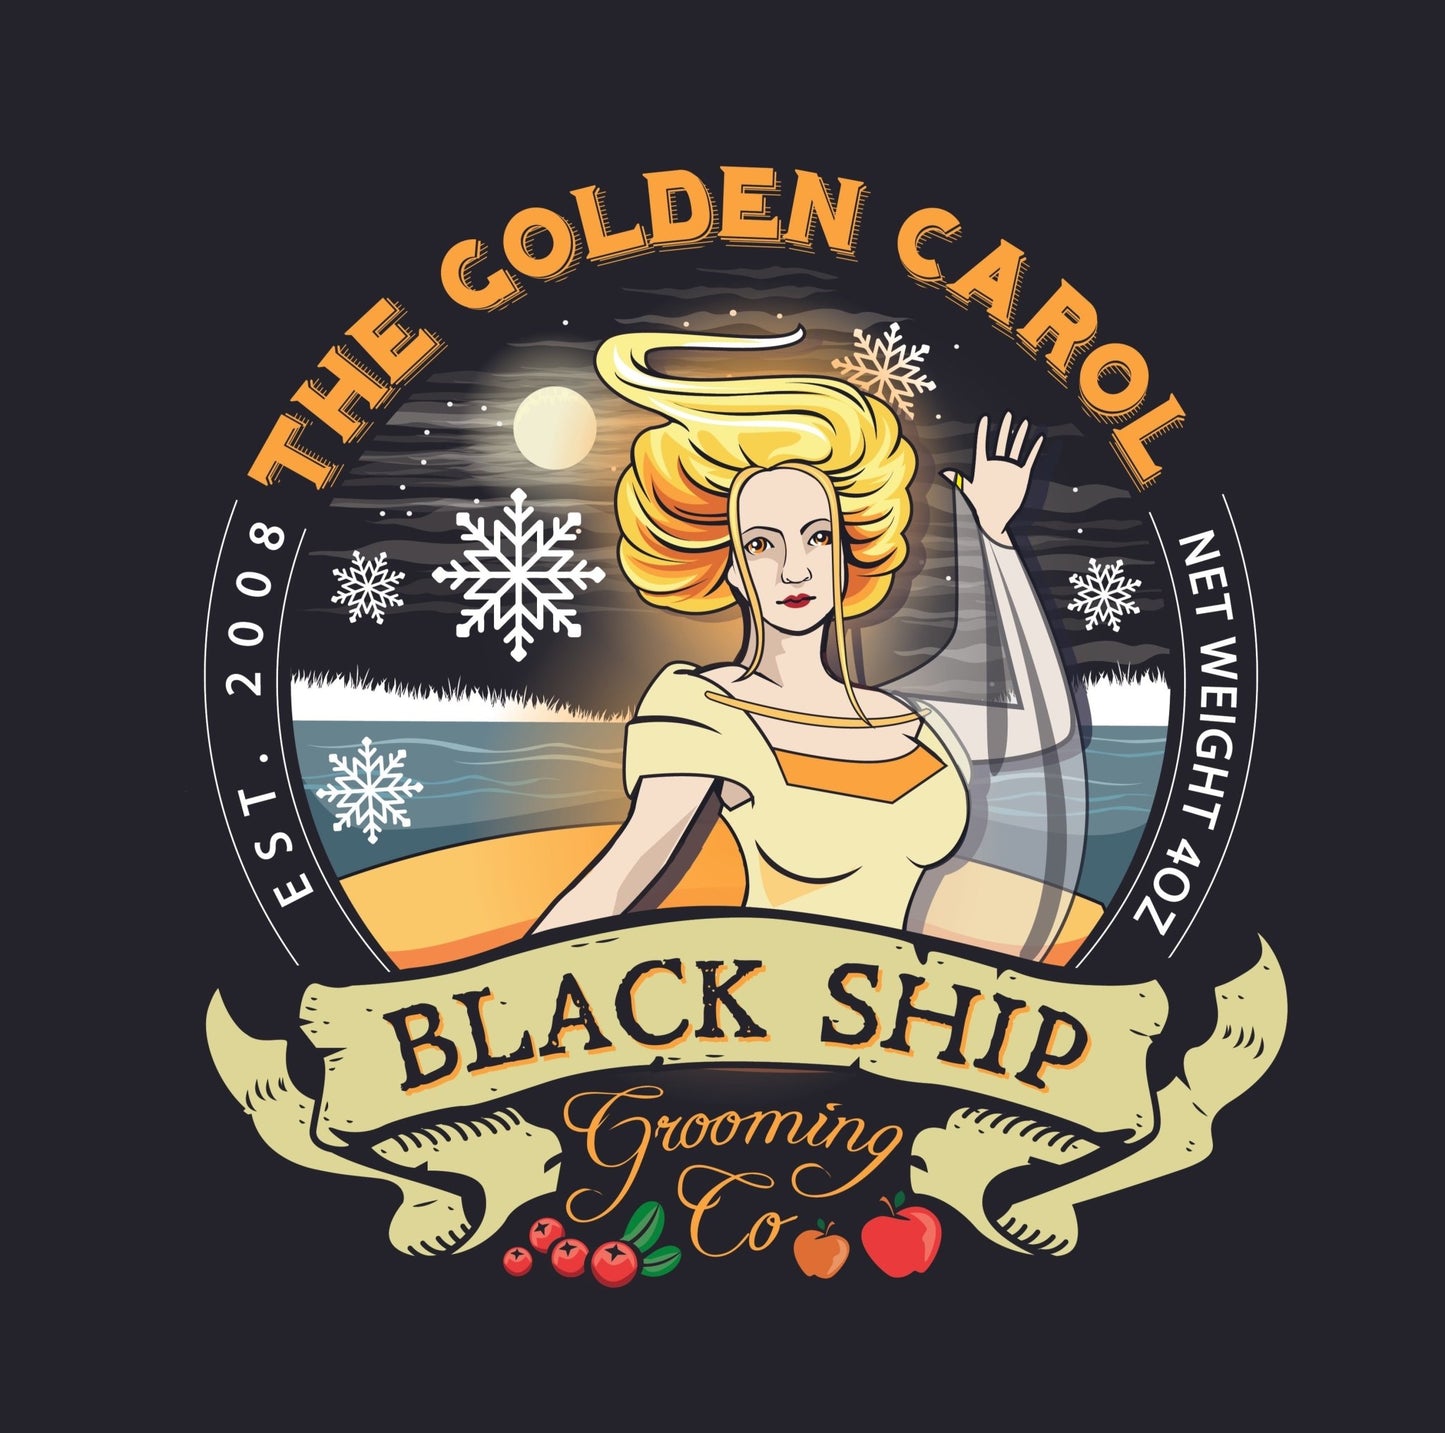 Load image into Gallery viewer, The Golden Carol Aftershave Splash - Black Ship Grooming Co.
